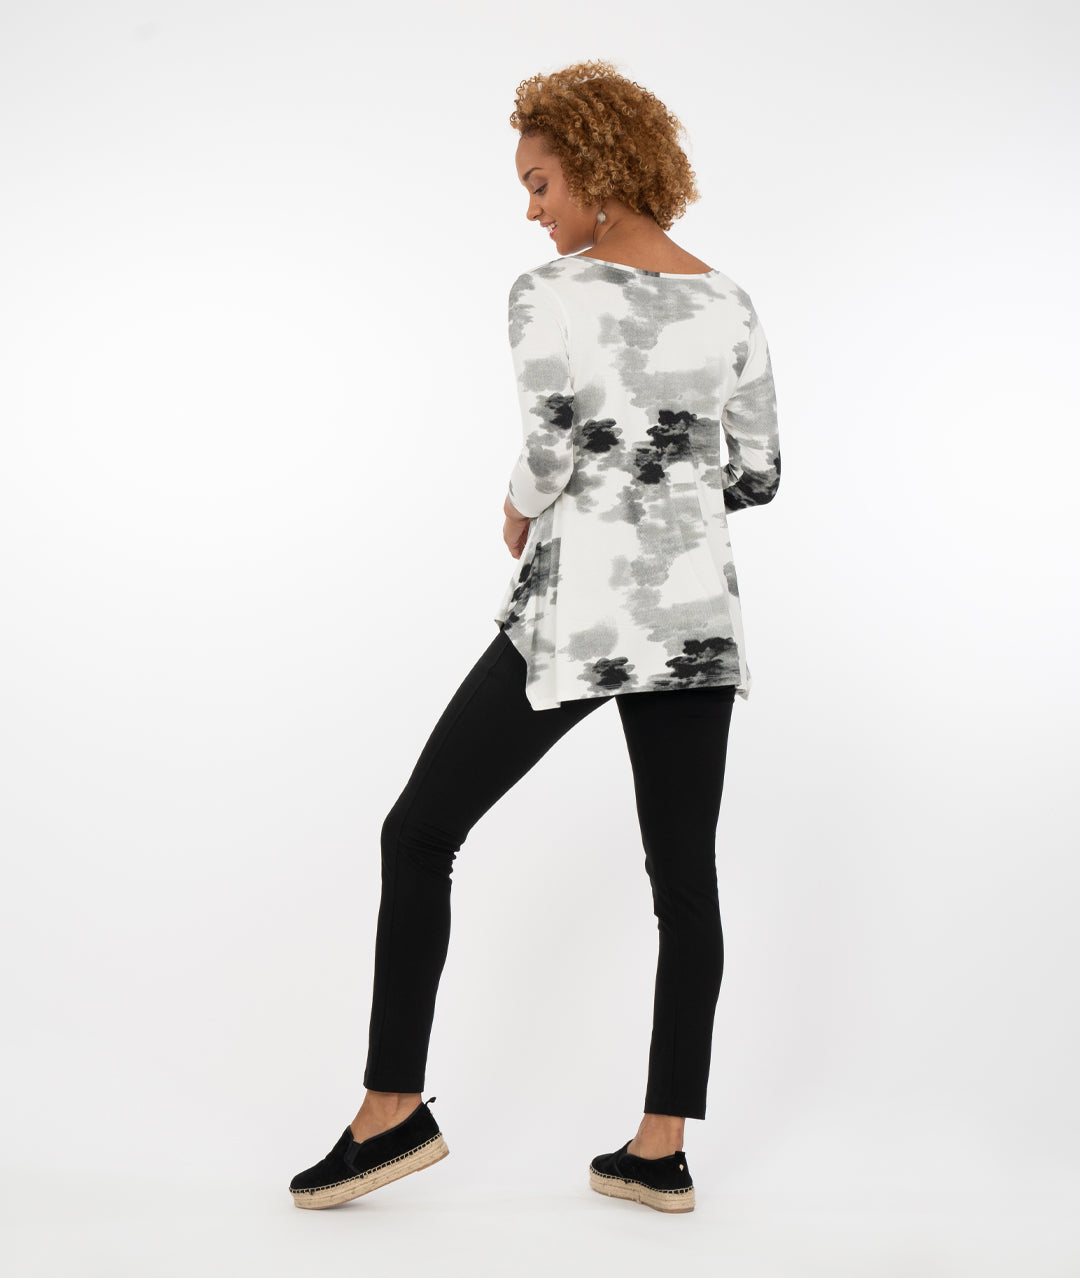 model wearing a black and white floral  top with black leggings in front of a white background